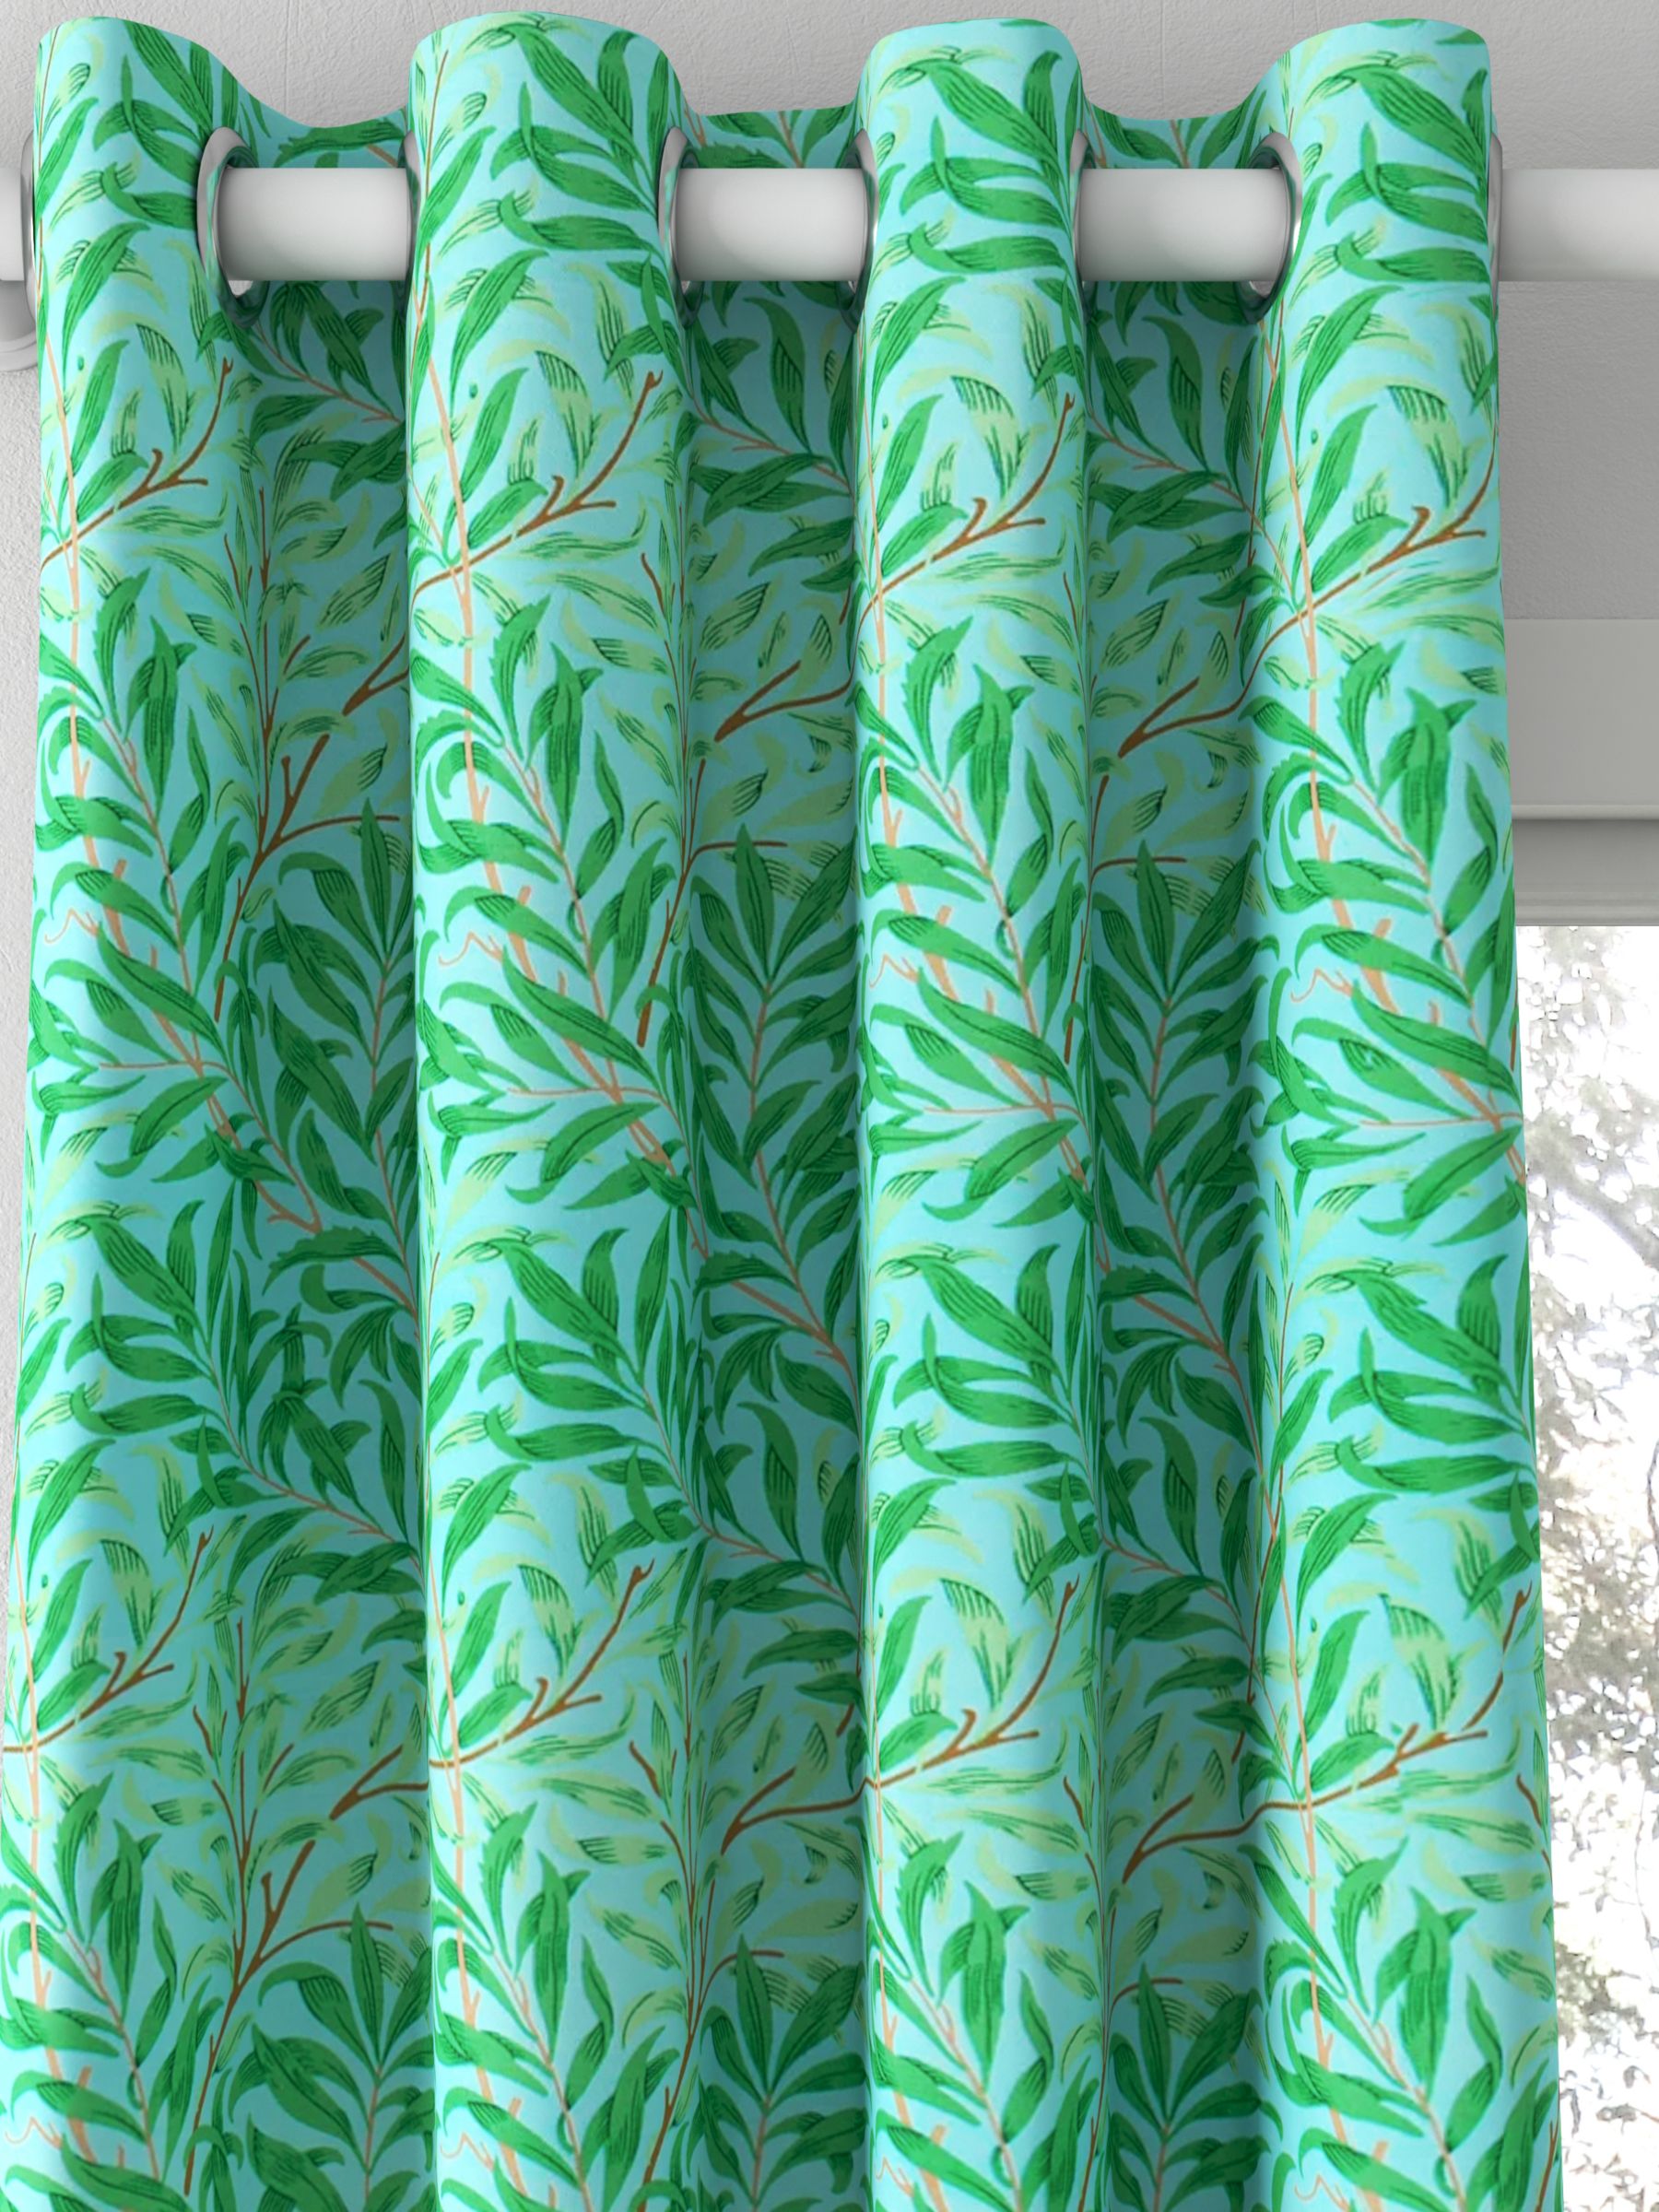 Morris & Co. Willow Boughs Made to Measure Curtains, Sky/Leaf Green